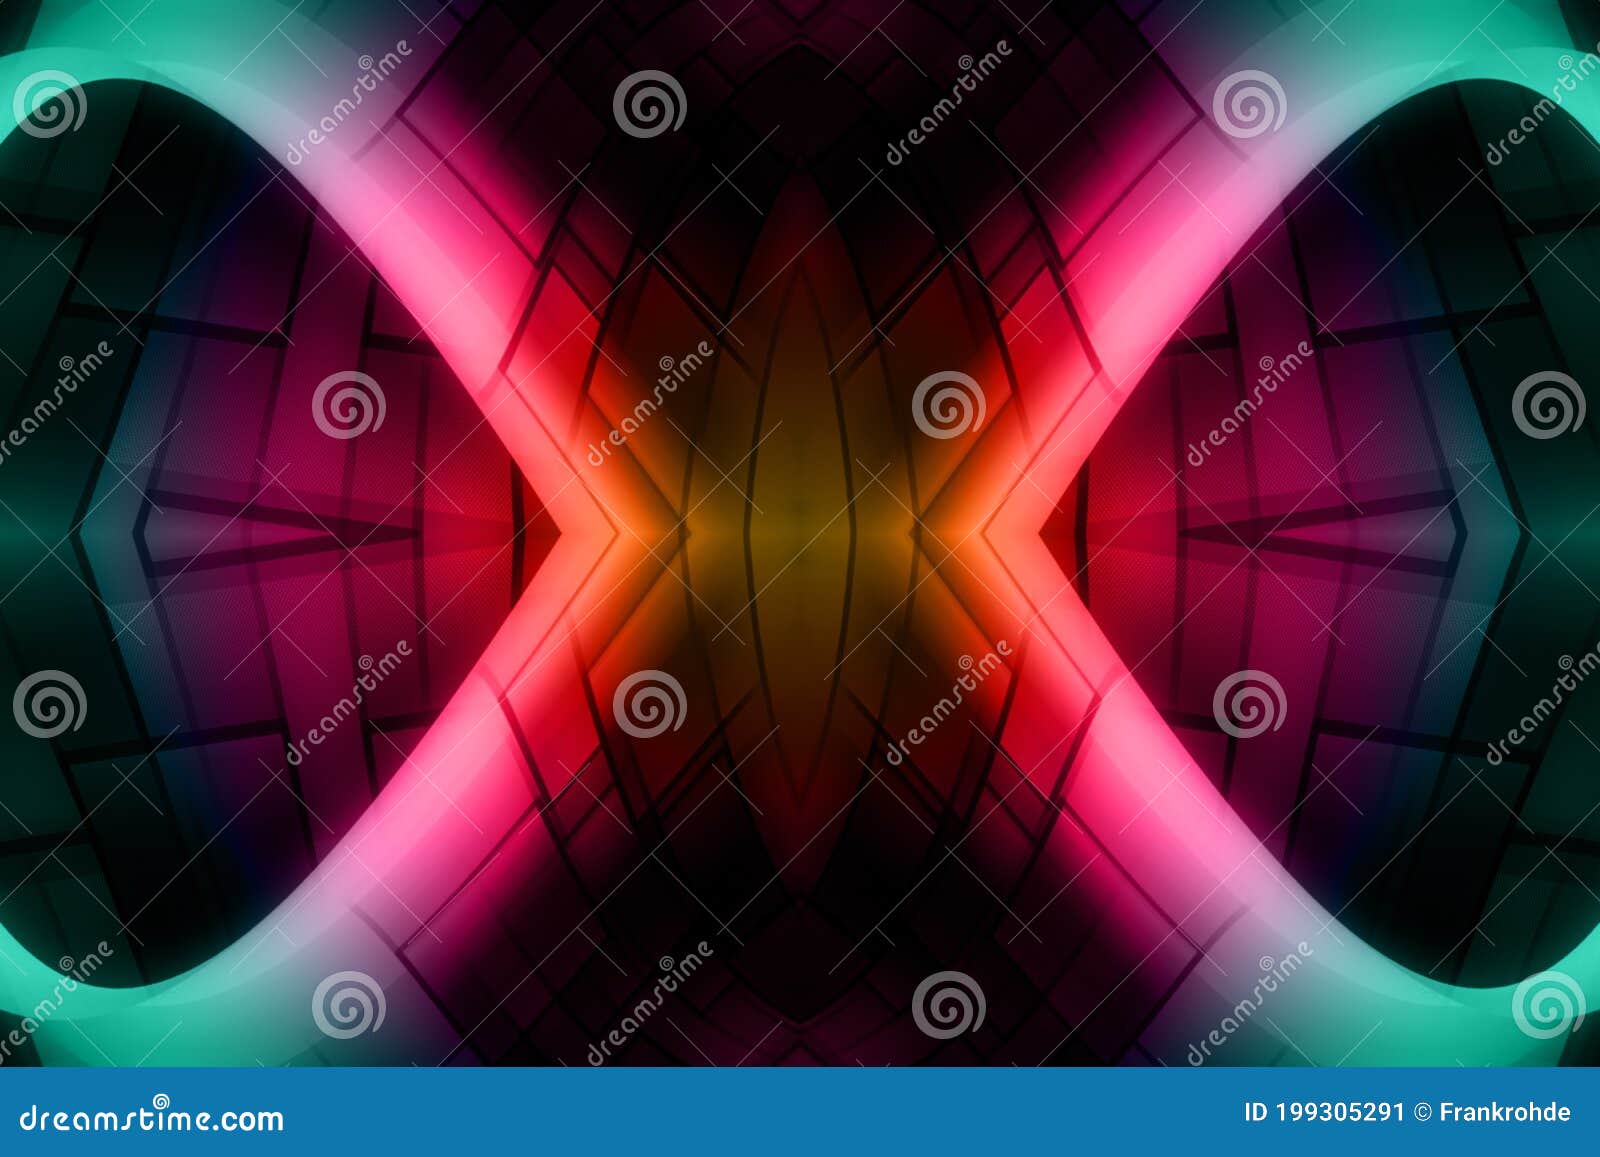 abstract wonderful background object